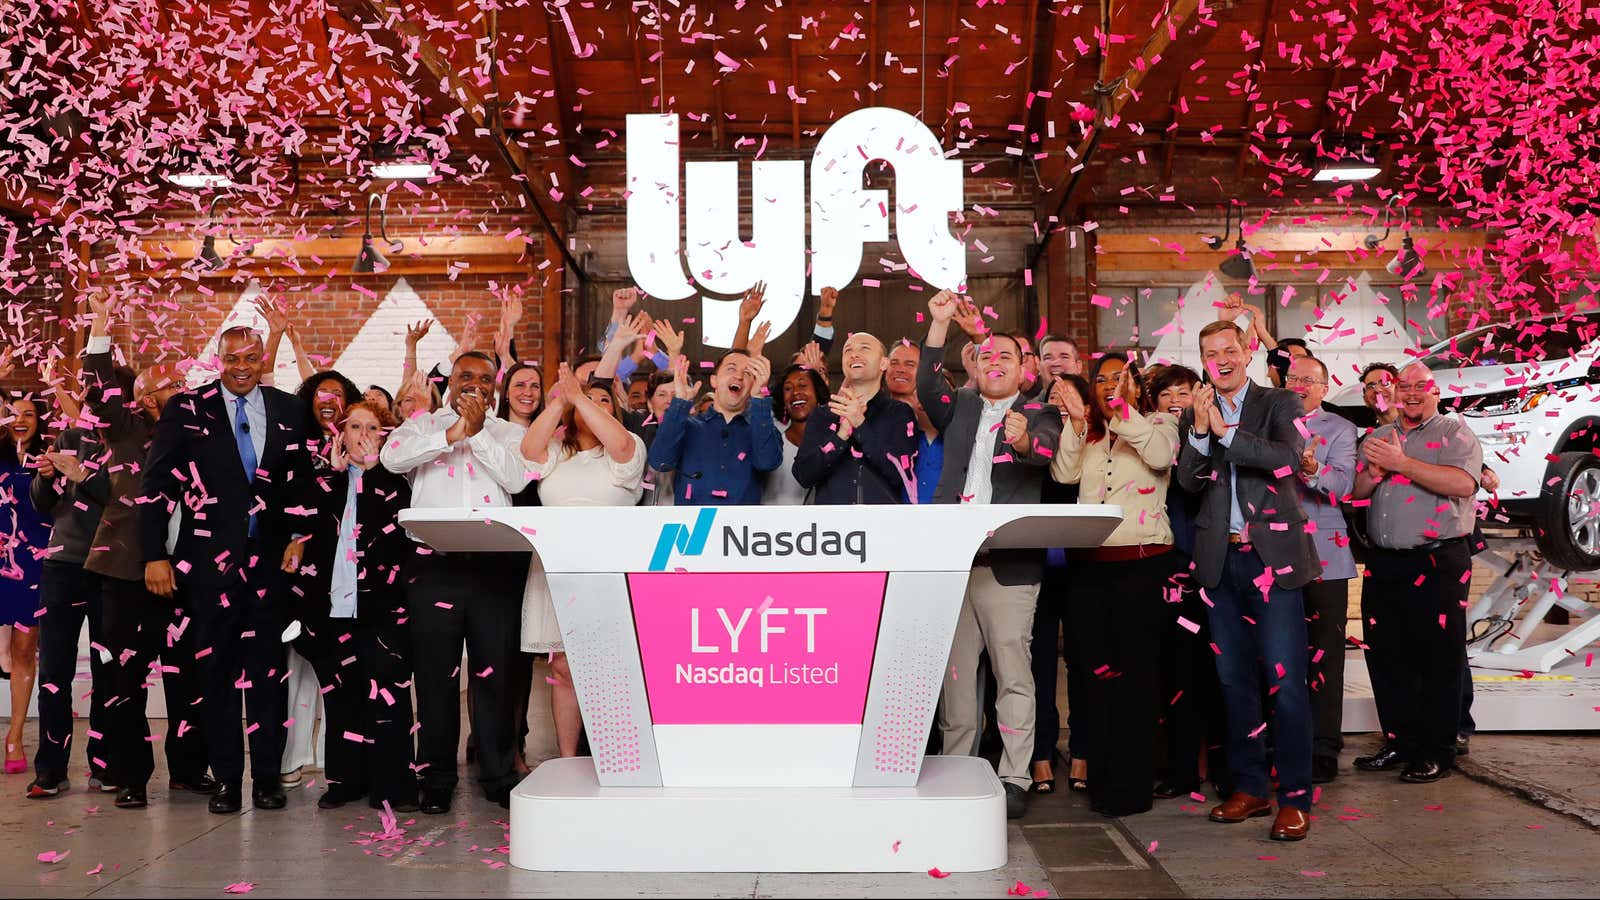 Lyft executives celebrate the company’s IPO at a party in Los Angeles.